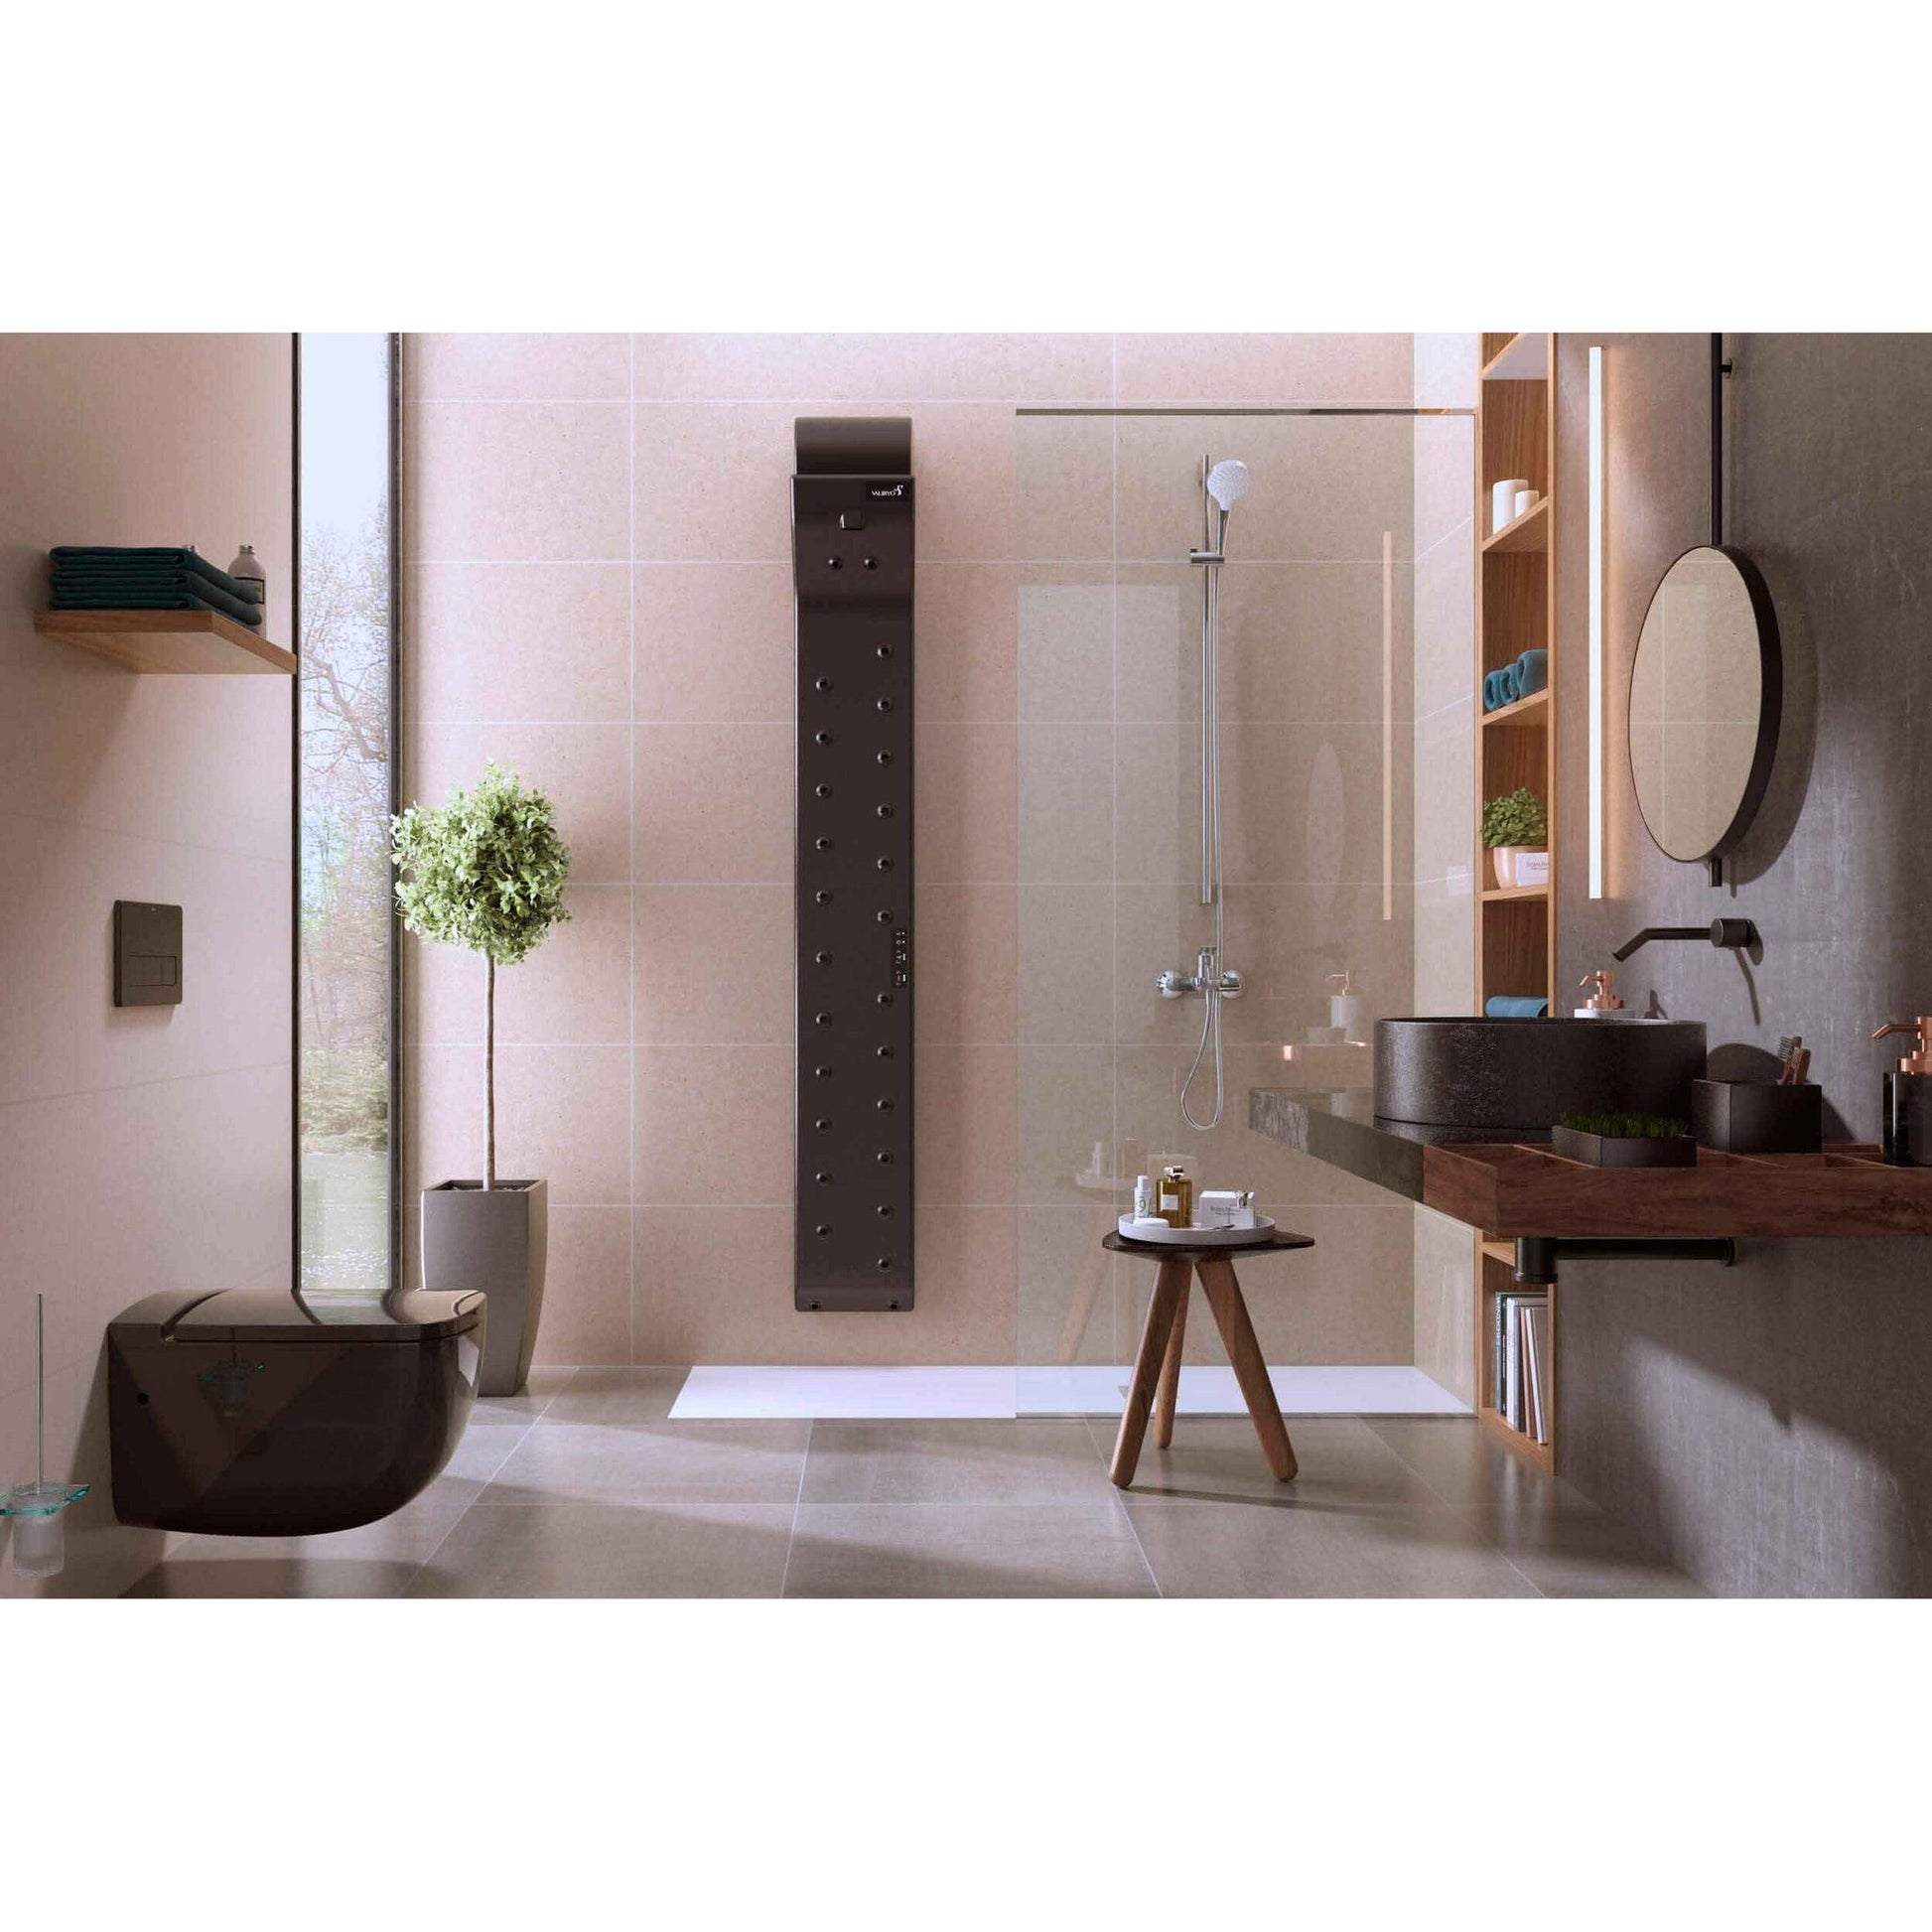 Valiryo 85 Matte Black Wall-Mounted Fully Automated Full-Body Dryer